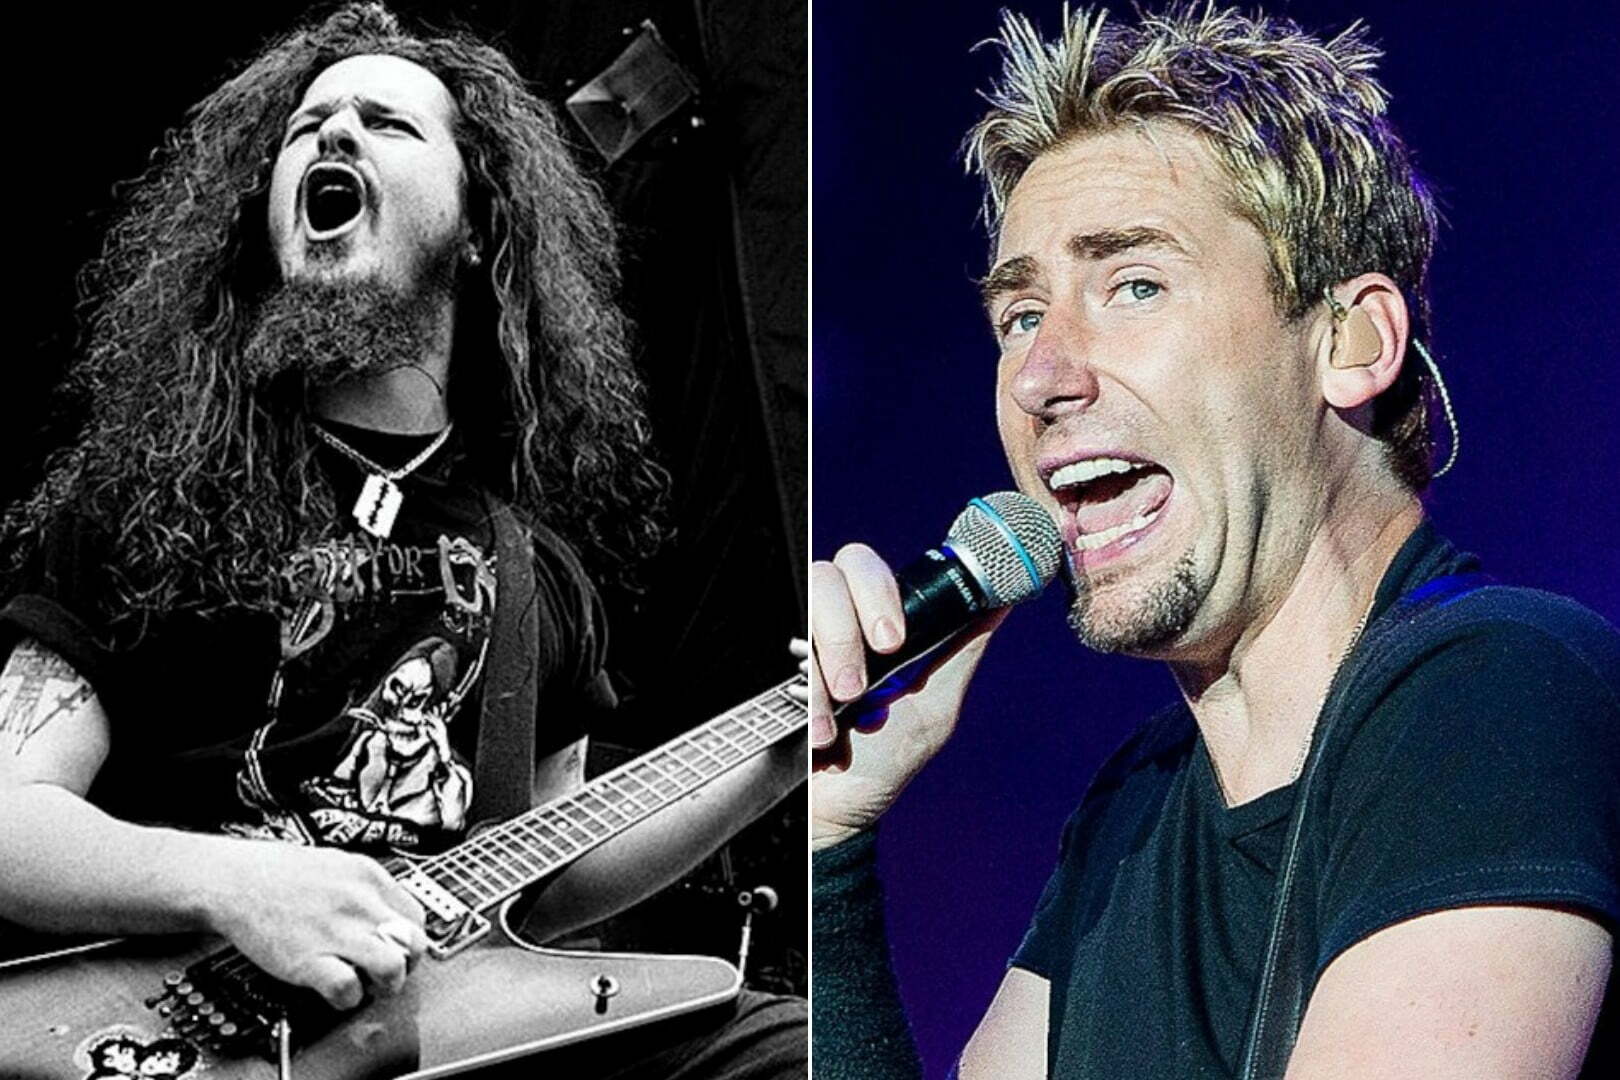 Chad Kroeger Describes Dimebag Darrell's Riffs And Solos As 'Unparalleled'